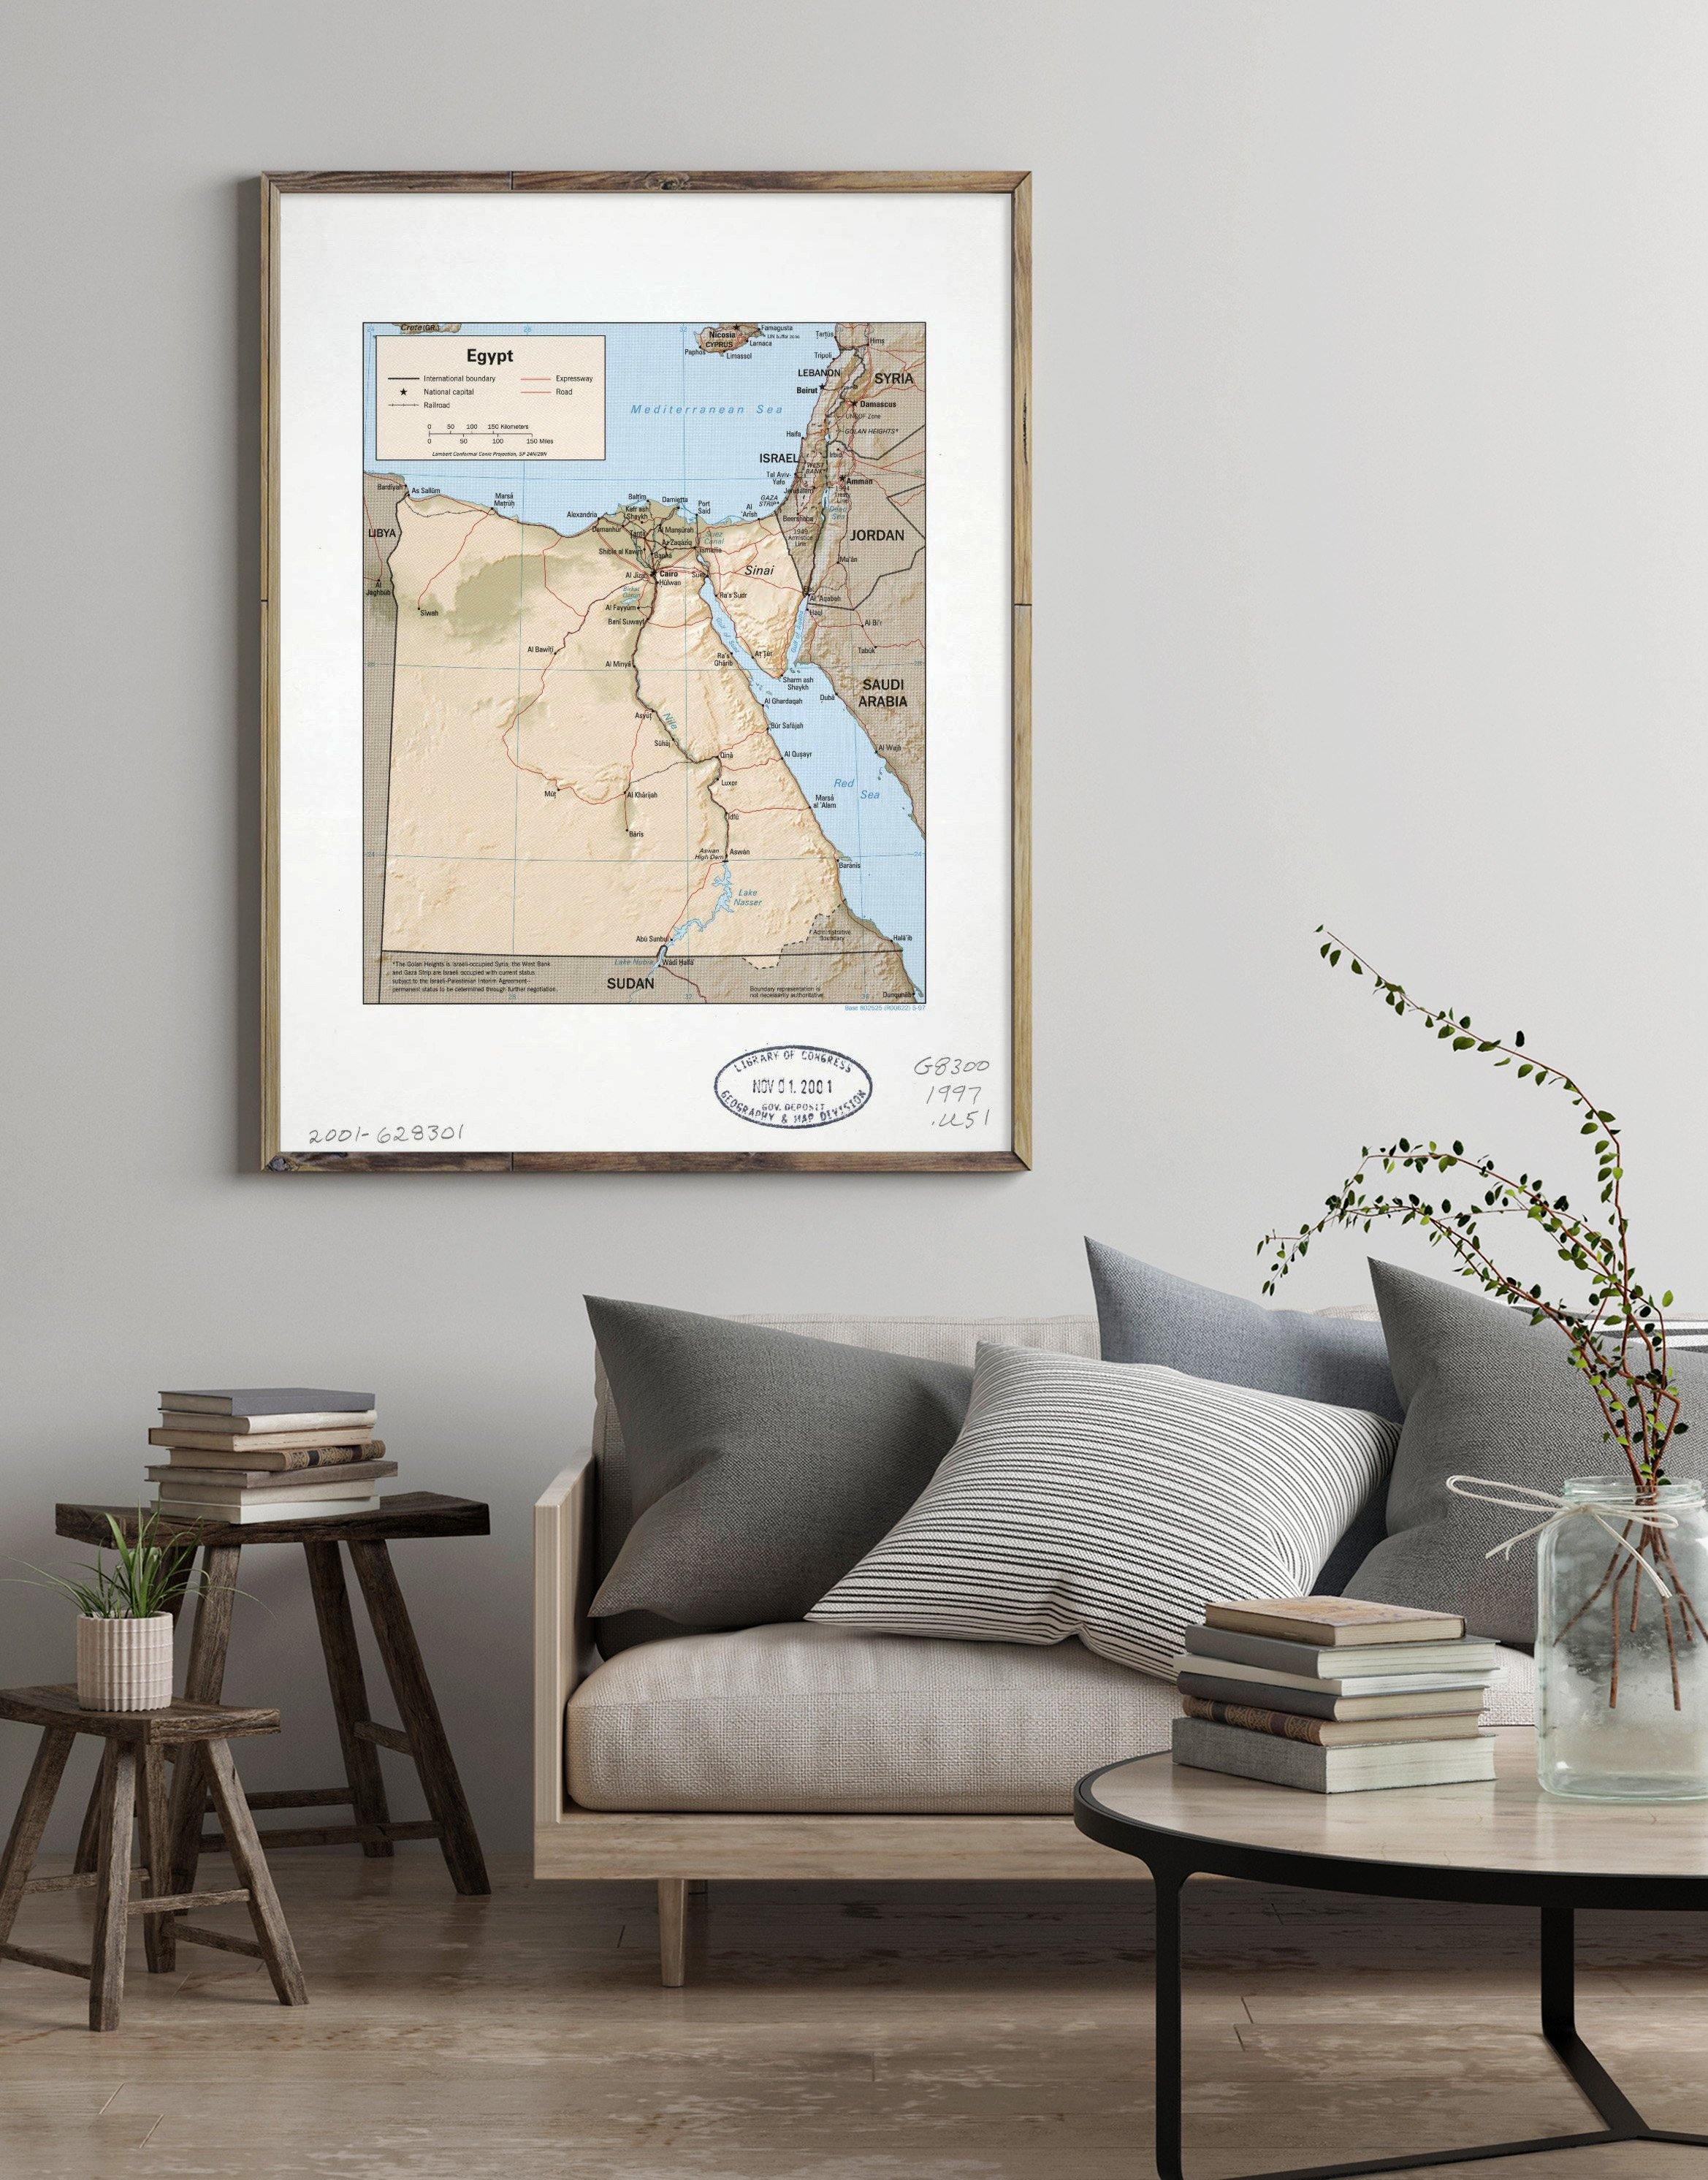 1997 Map| Egypt| Egypt Map Size: 18 inches x 24 inches |Fits 18x24 siz - New York Map Company